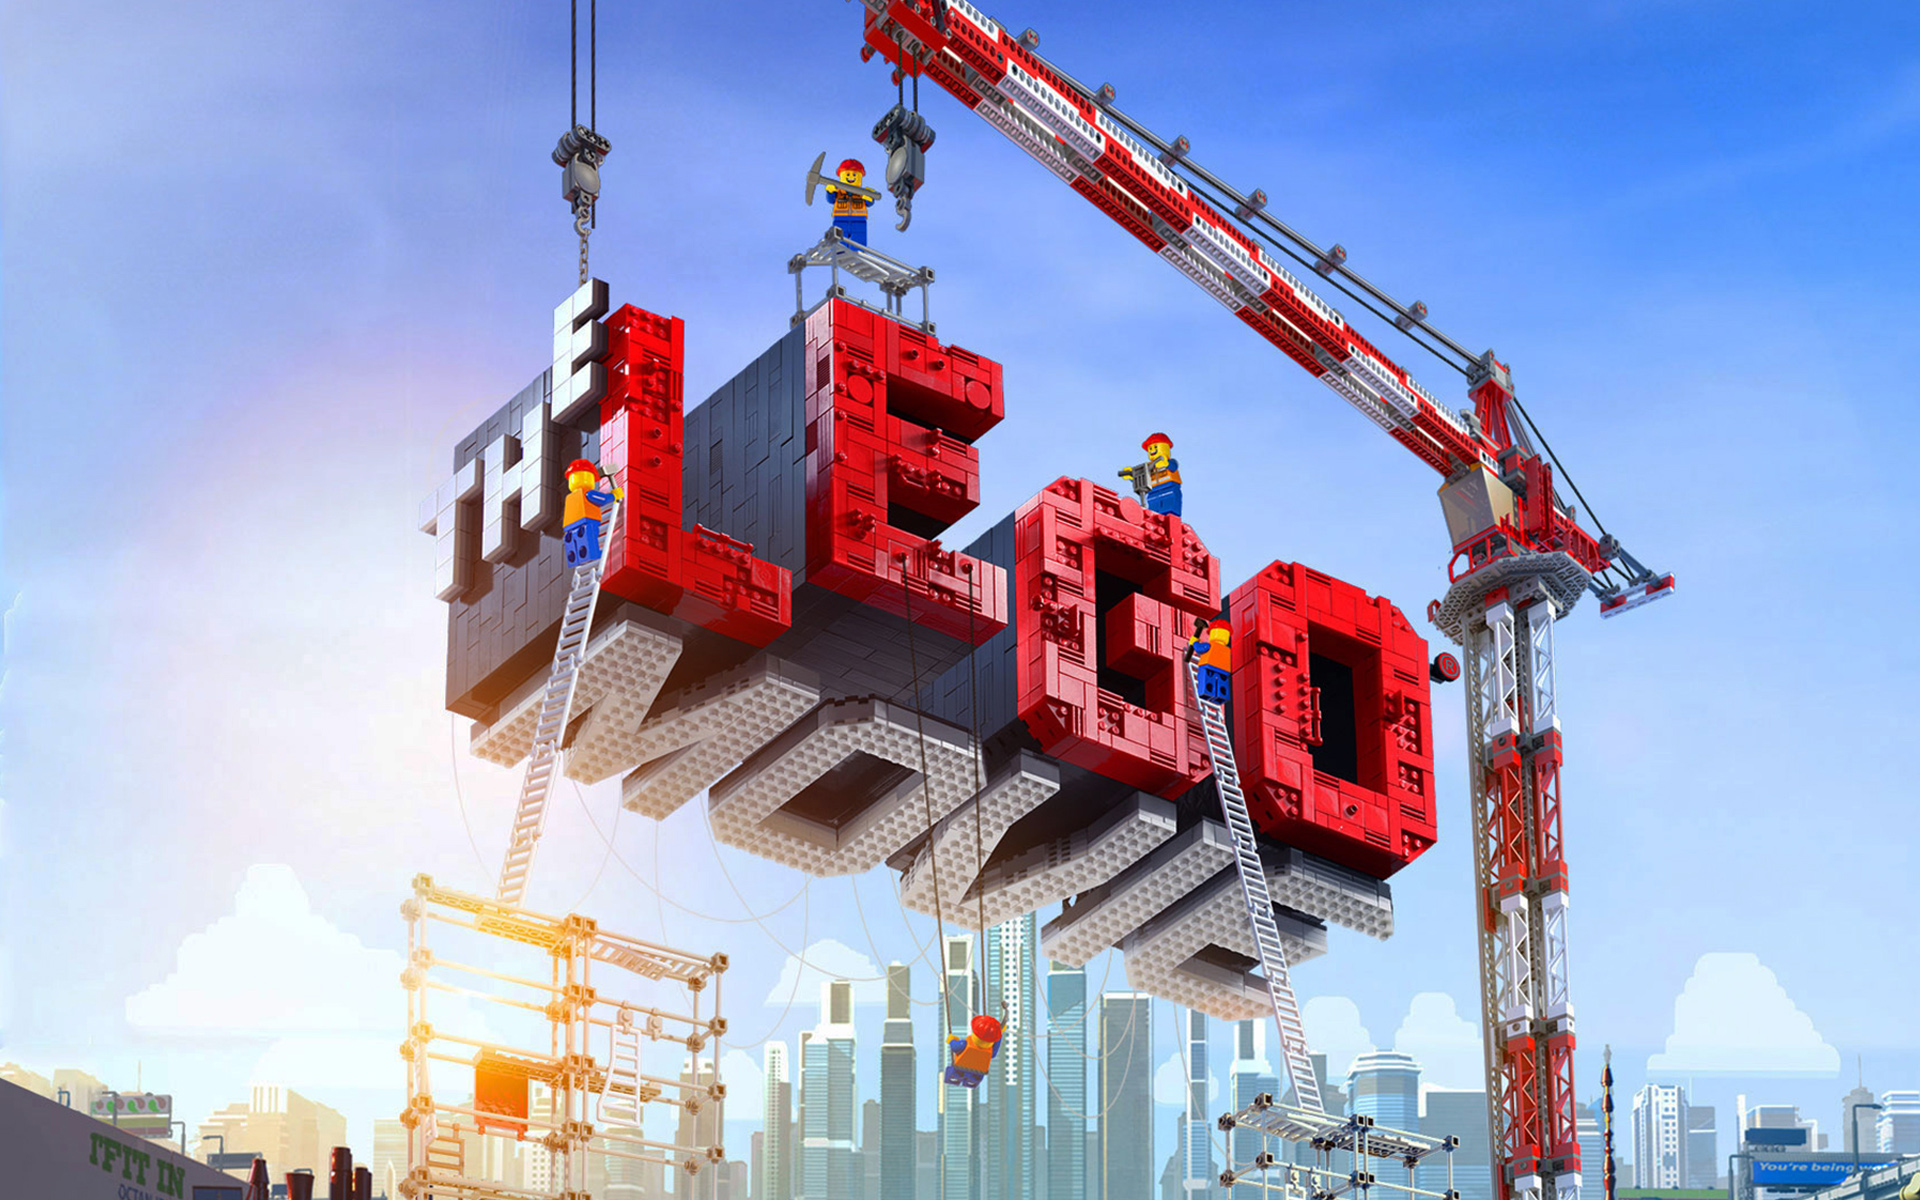 Film review: The Lego Movie